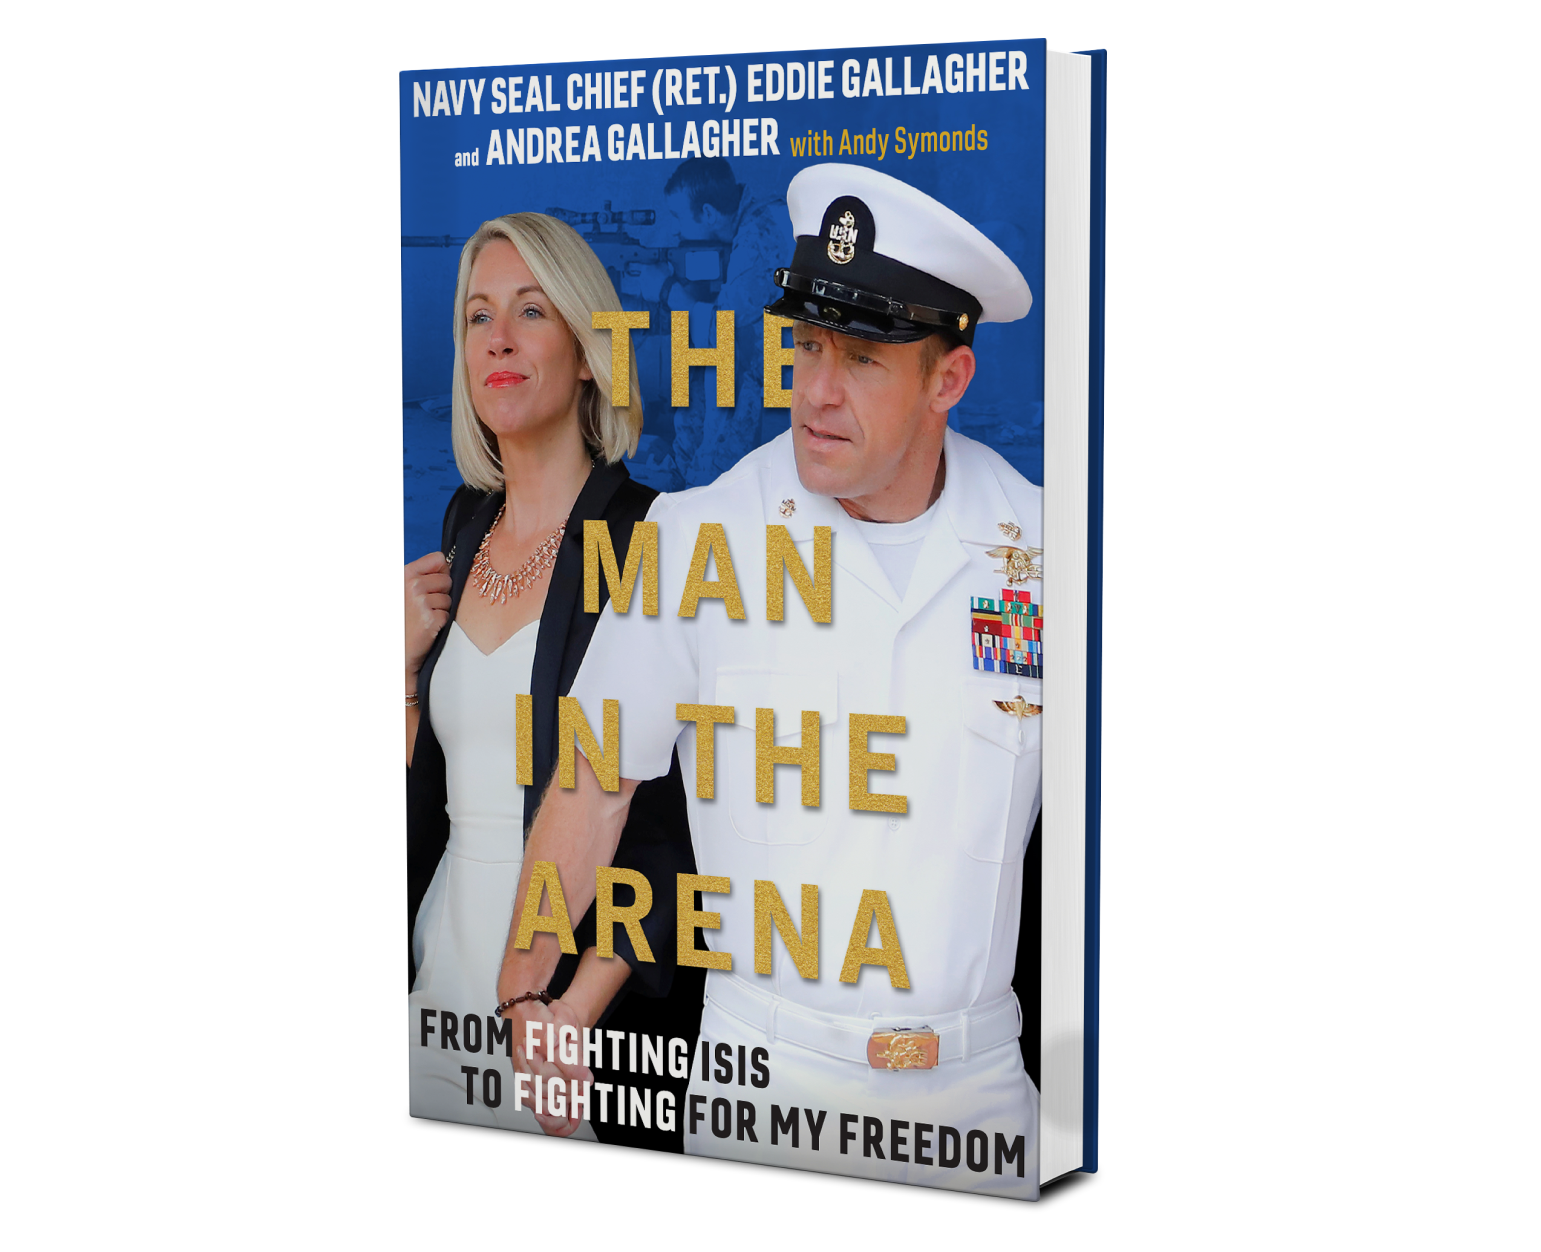 The Man in the Arena - The true story of Navy SEAL Chief Eddie 